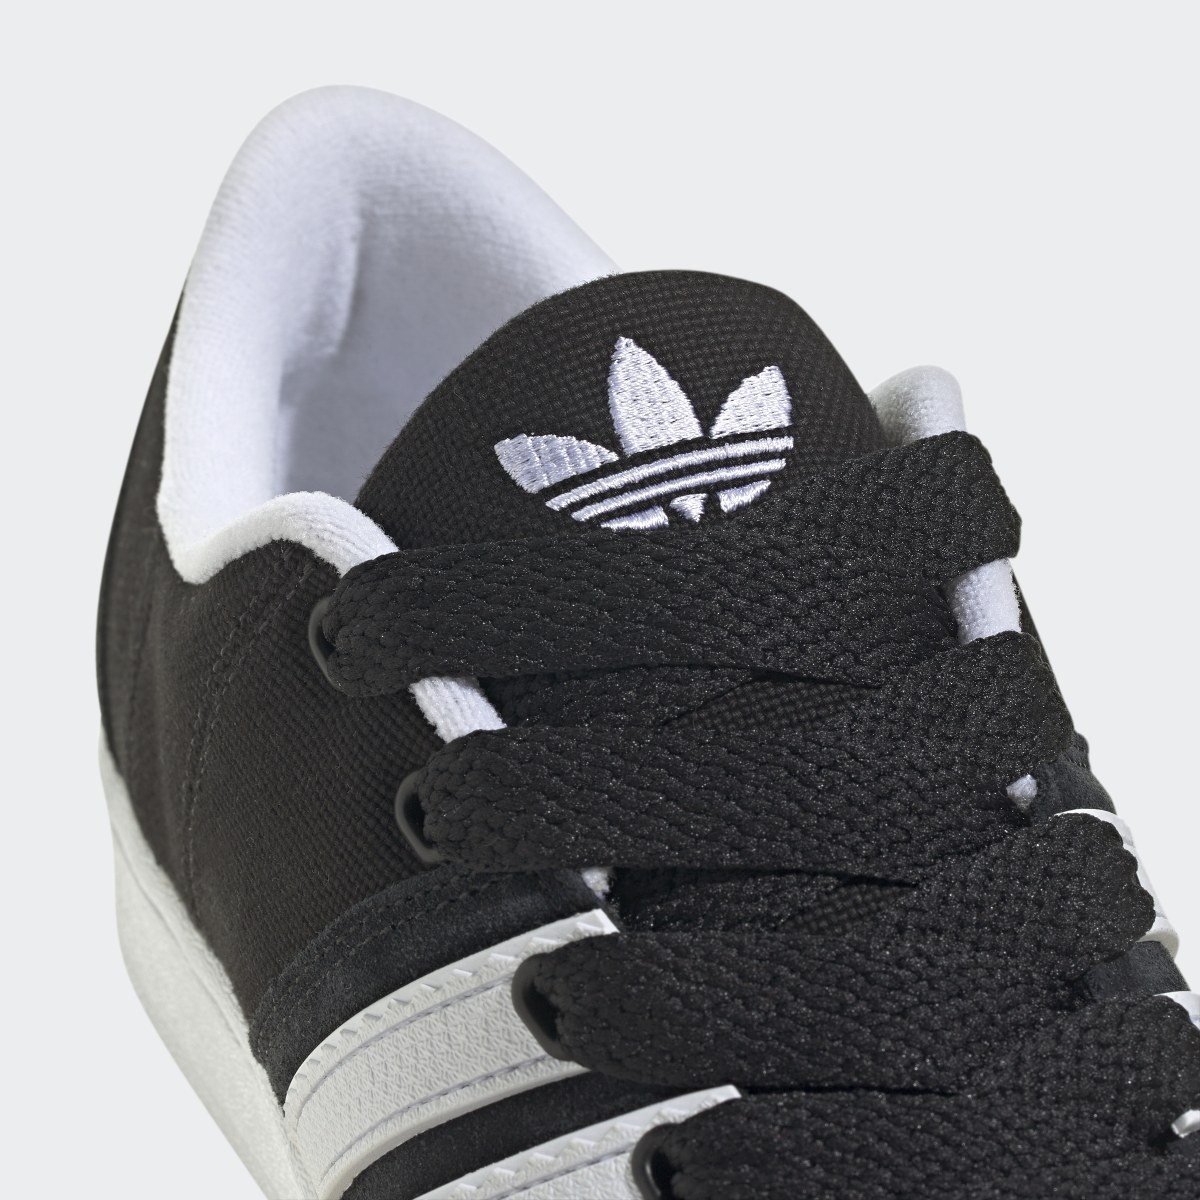 Adidas Superstar Supermodified Shoes. 8